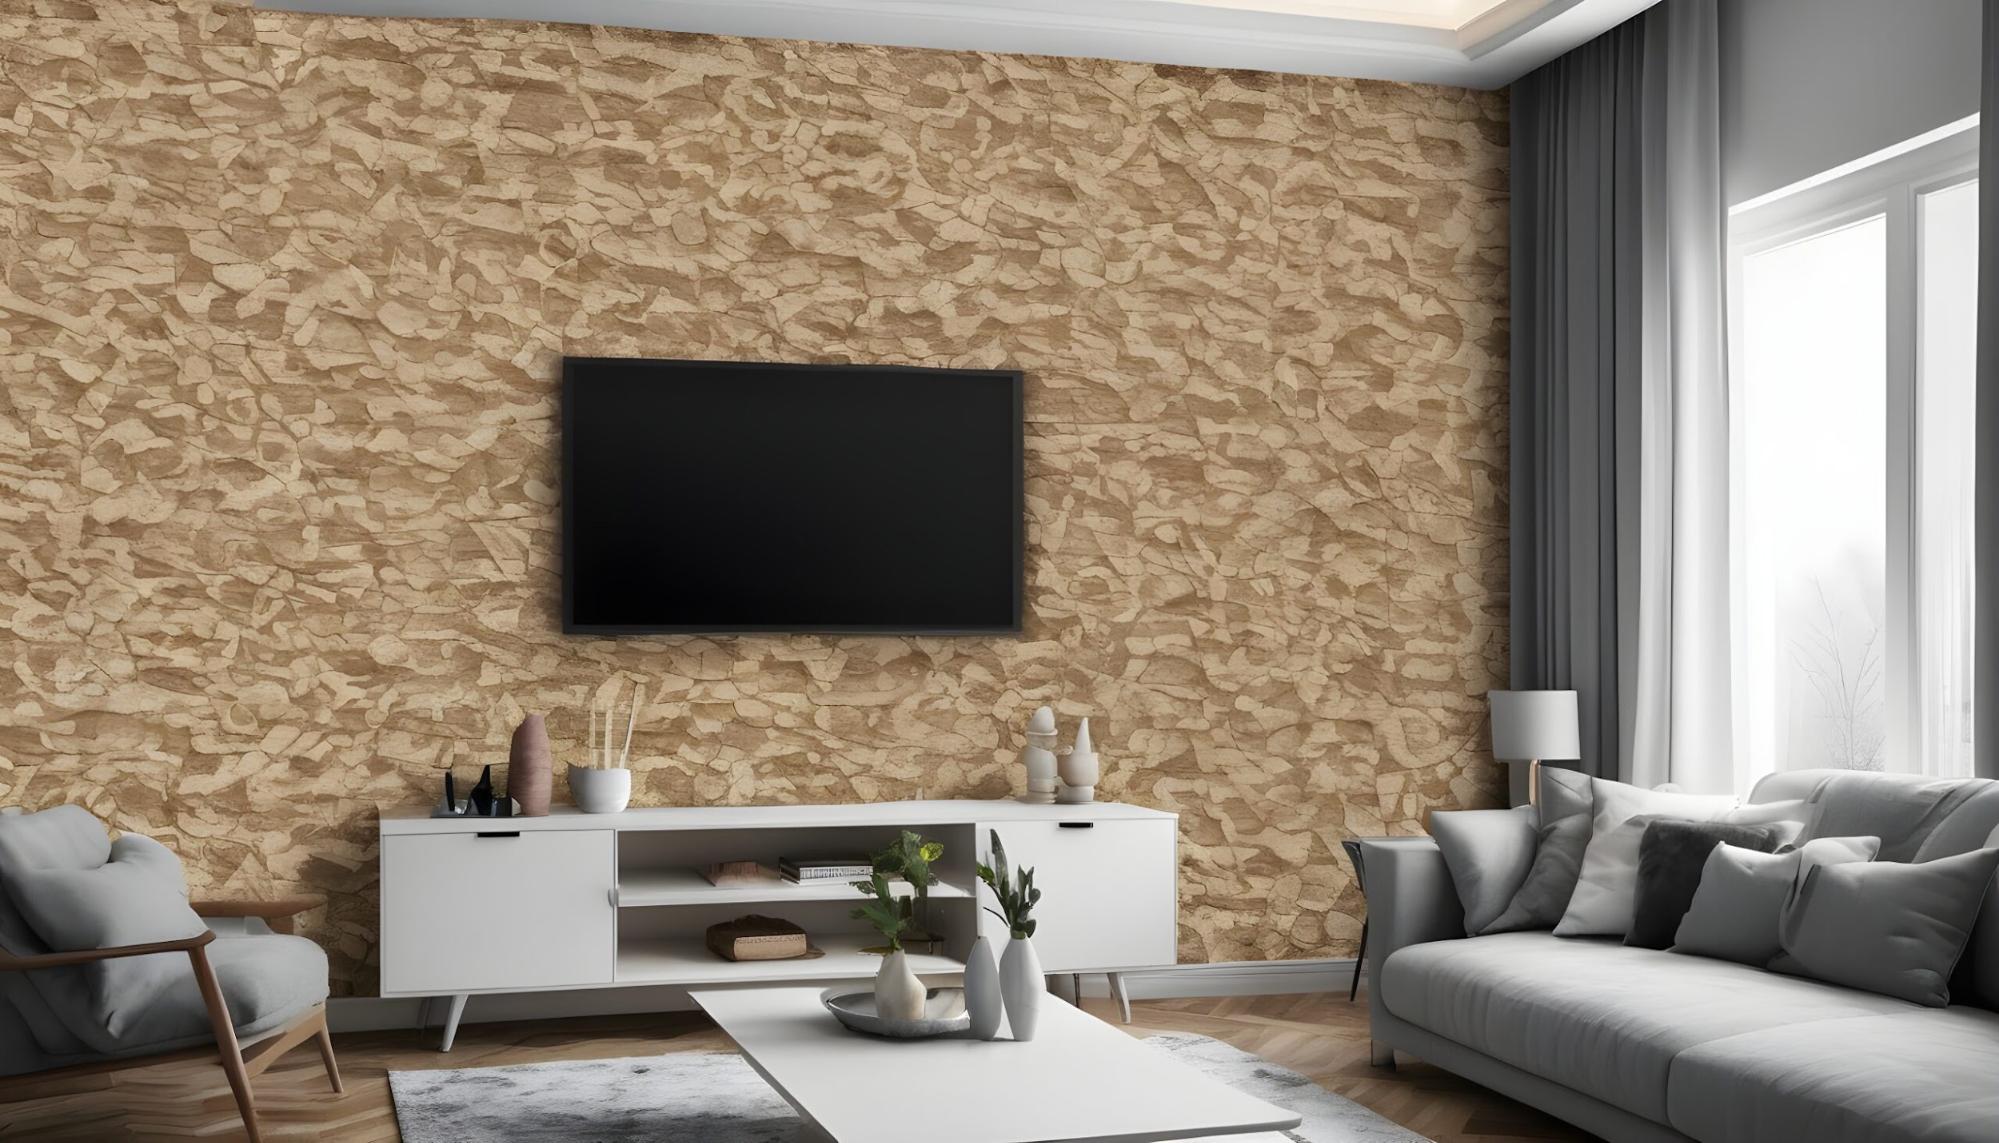 Abstract Texture Design wallpaper on living room wall